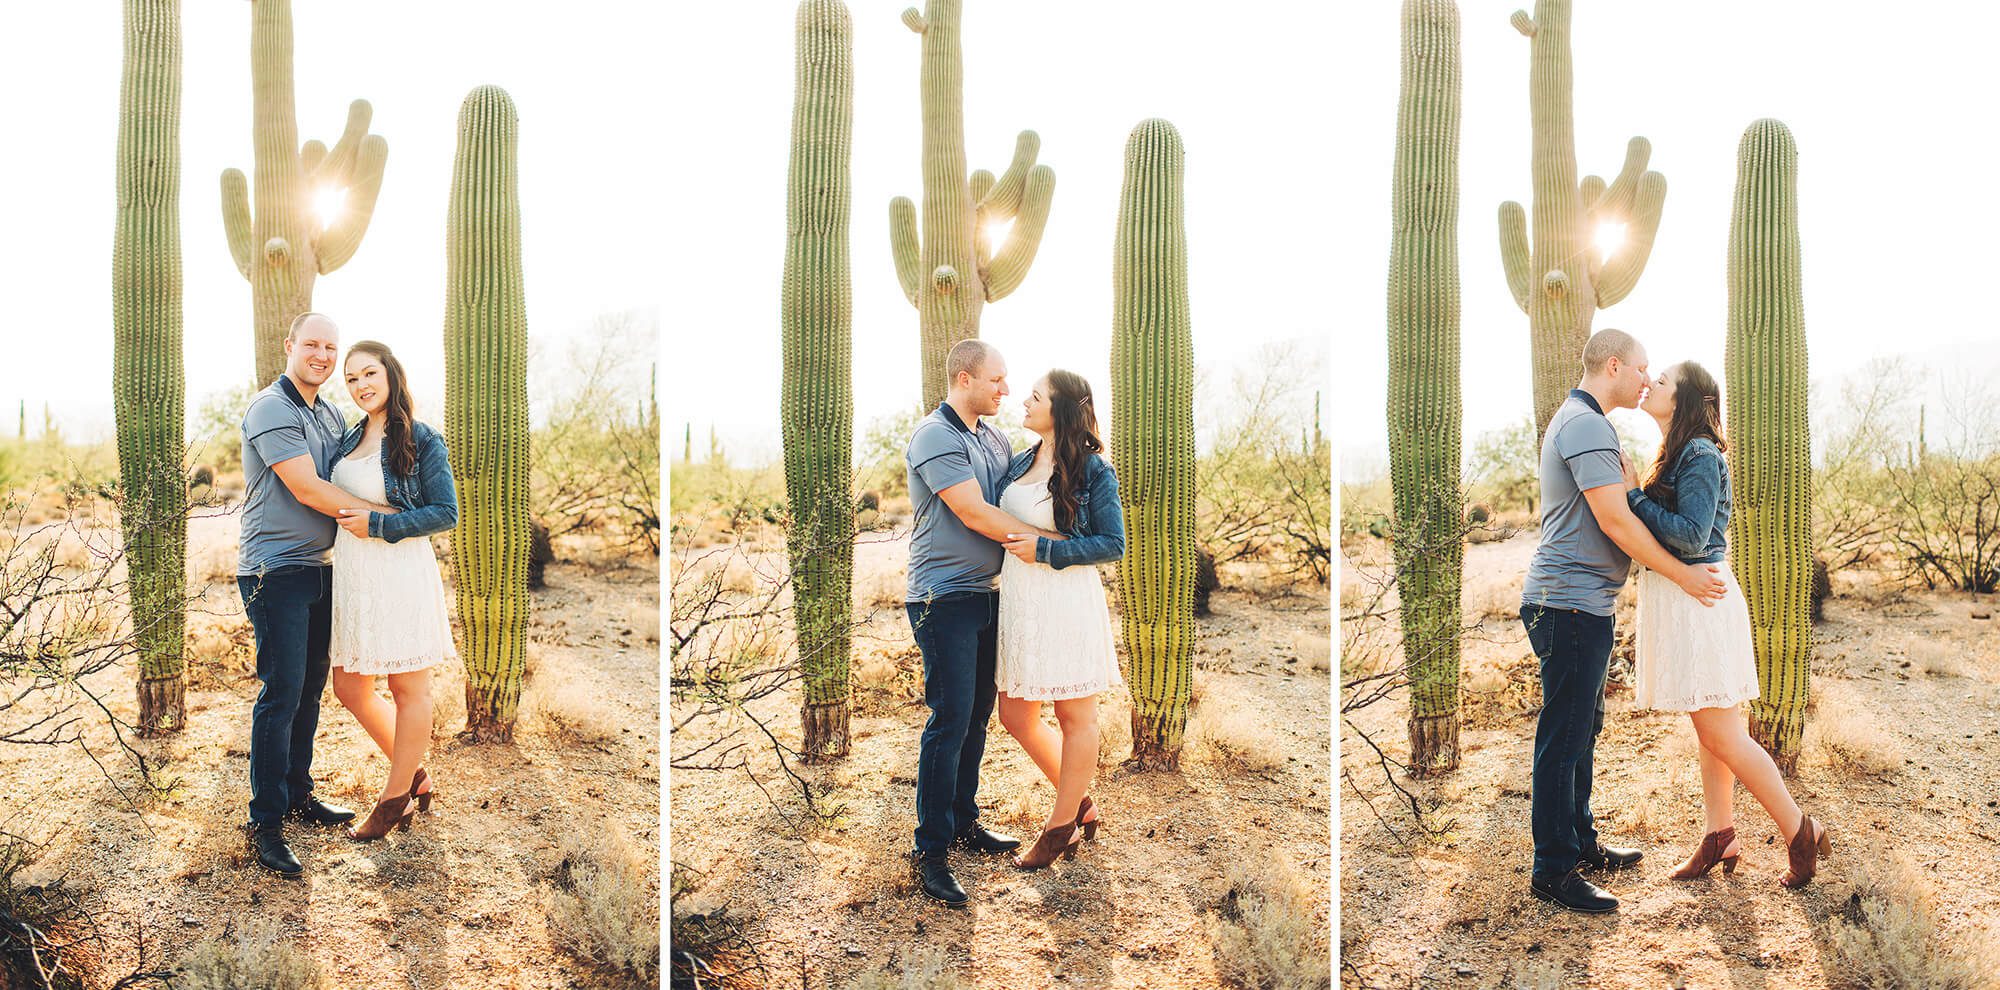 Alicia and Stephen together for a few couples photos during their family session